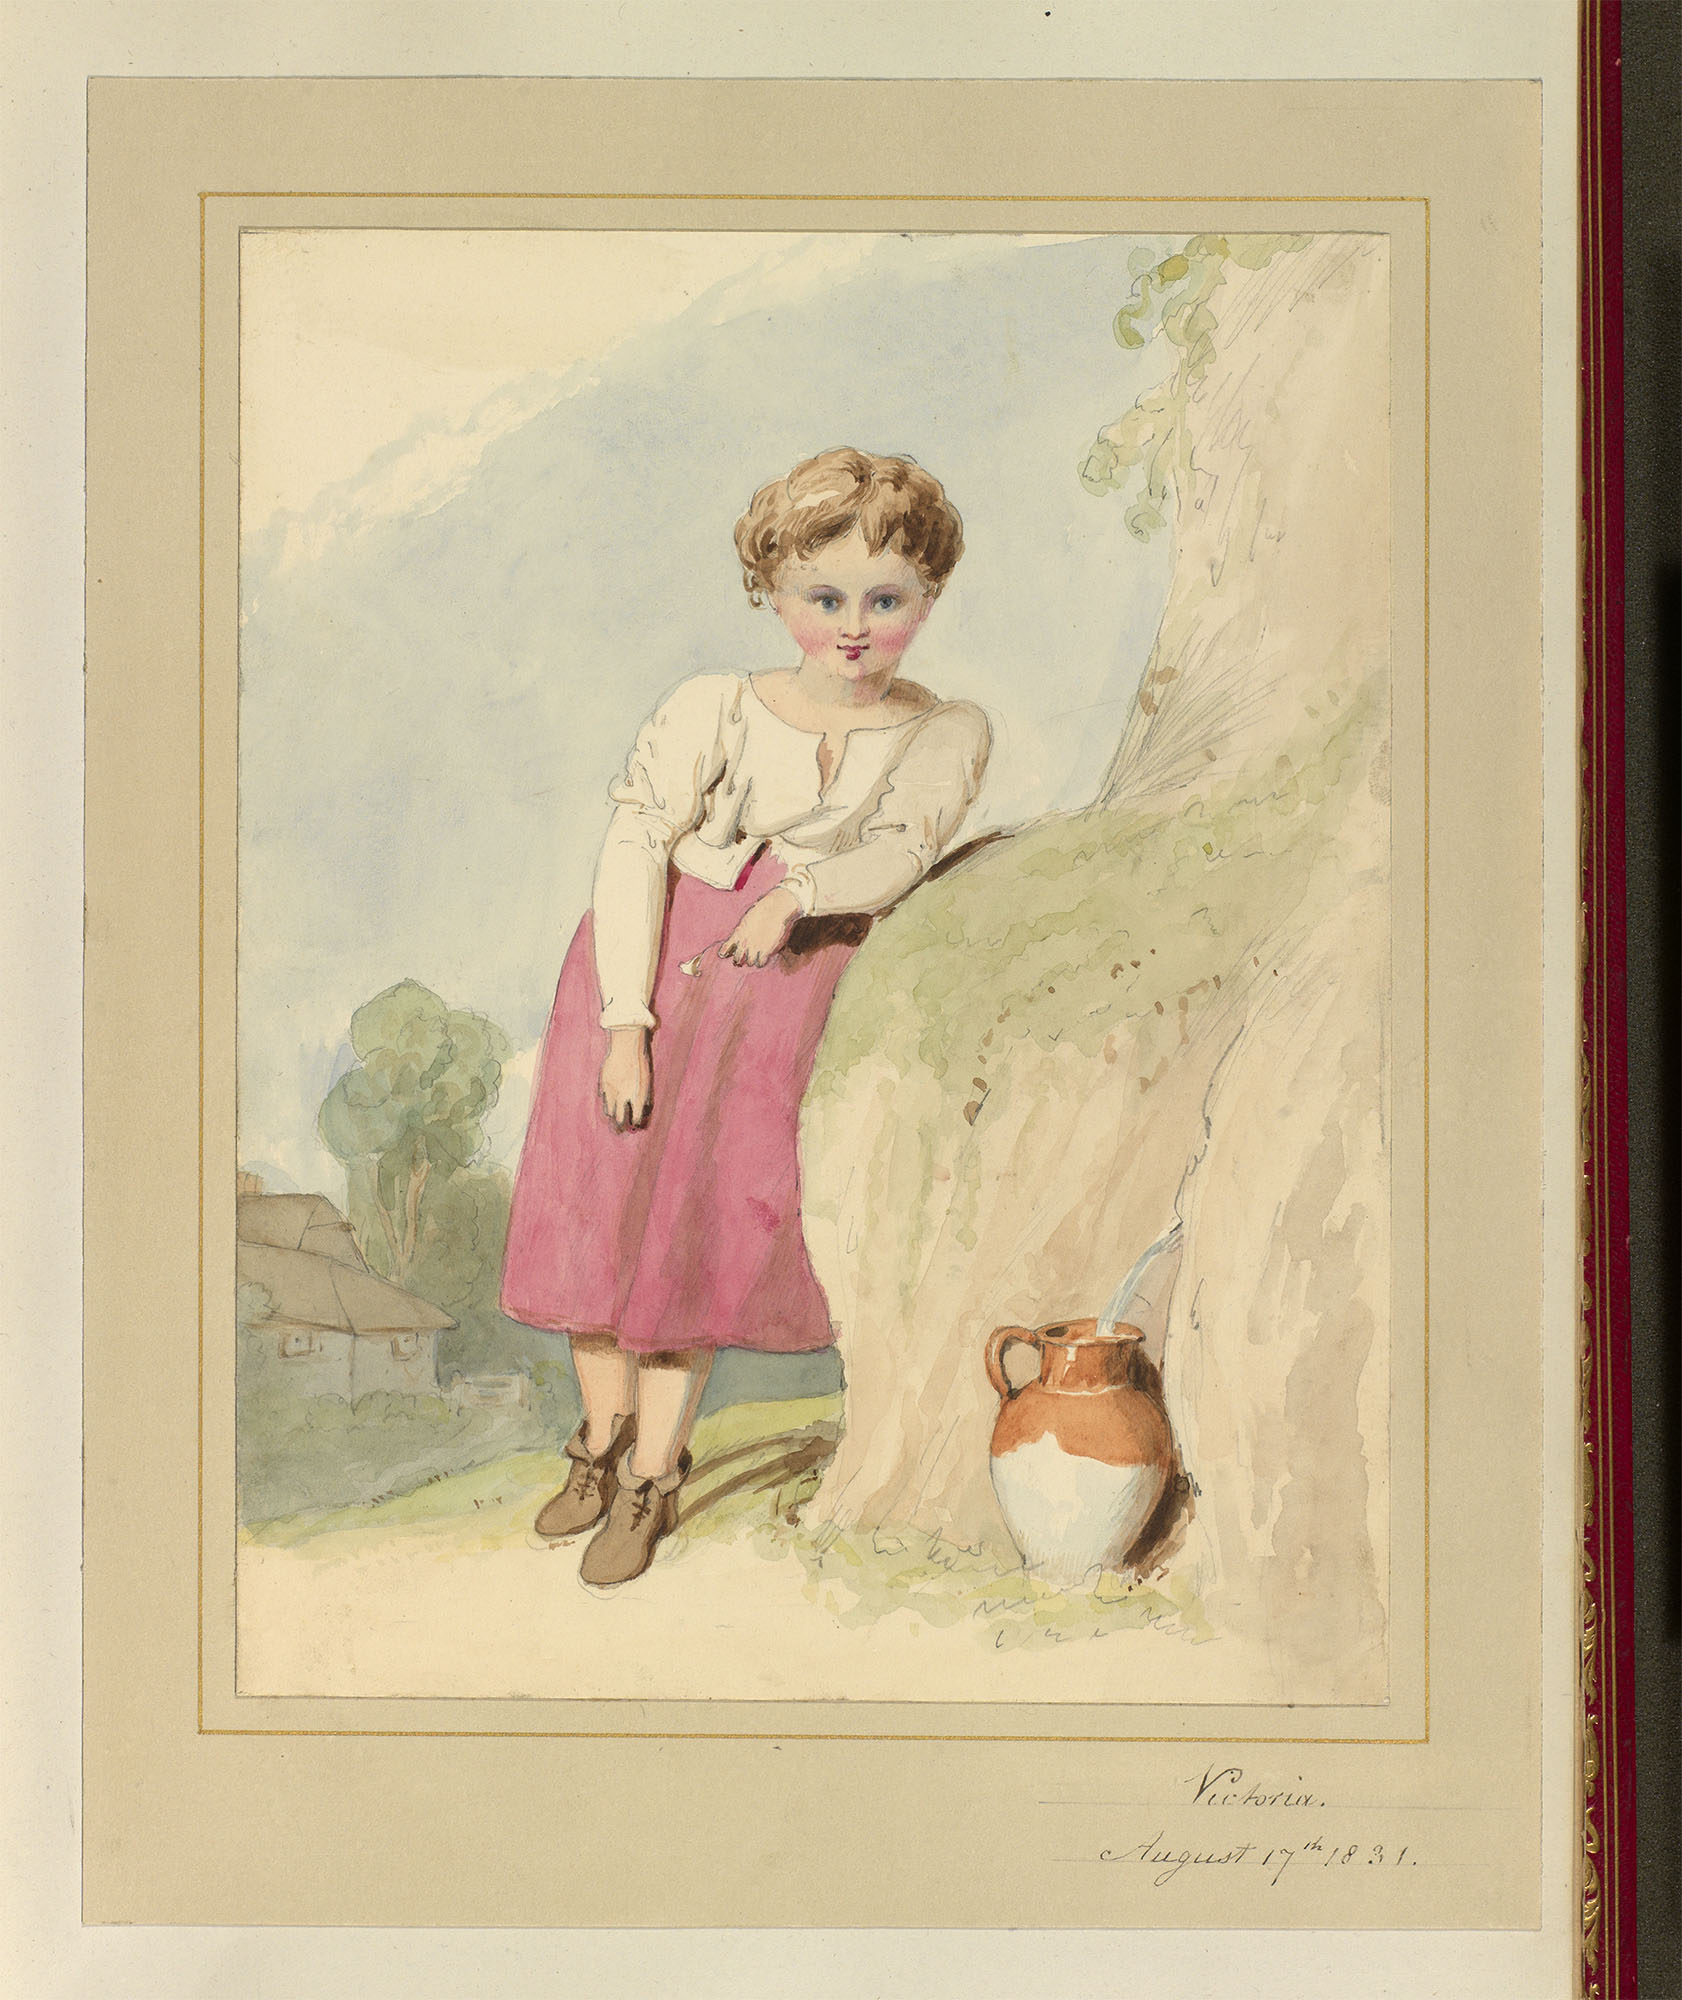 A watercolour showing a young girl filling a pitcher with water from a spring, after Richard Westall (RCIN 925132). She is shown full-length, facing forward and leaning on a rock. She is holding a small wild flower in one hand. Inscribed lower right: Vict